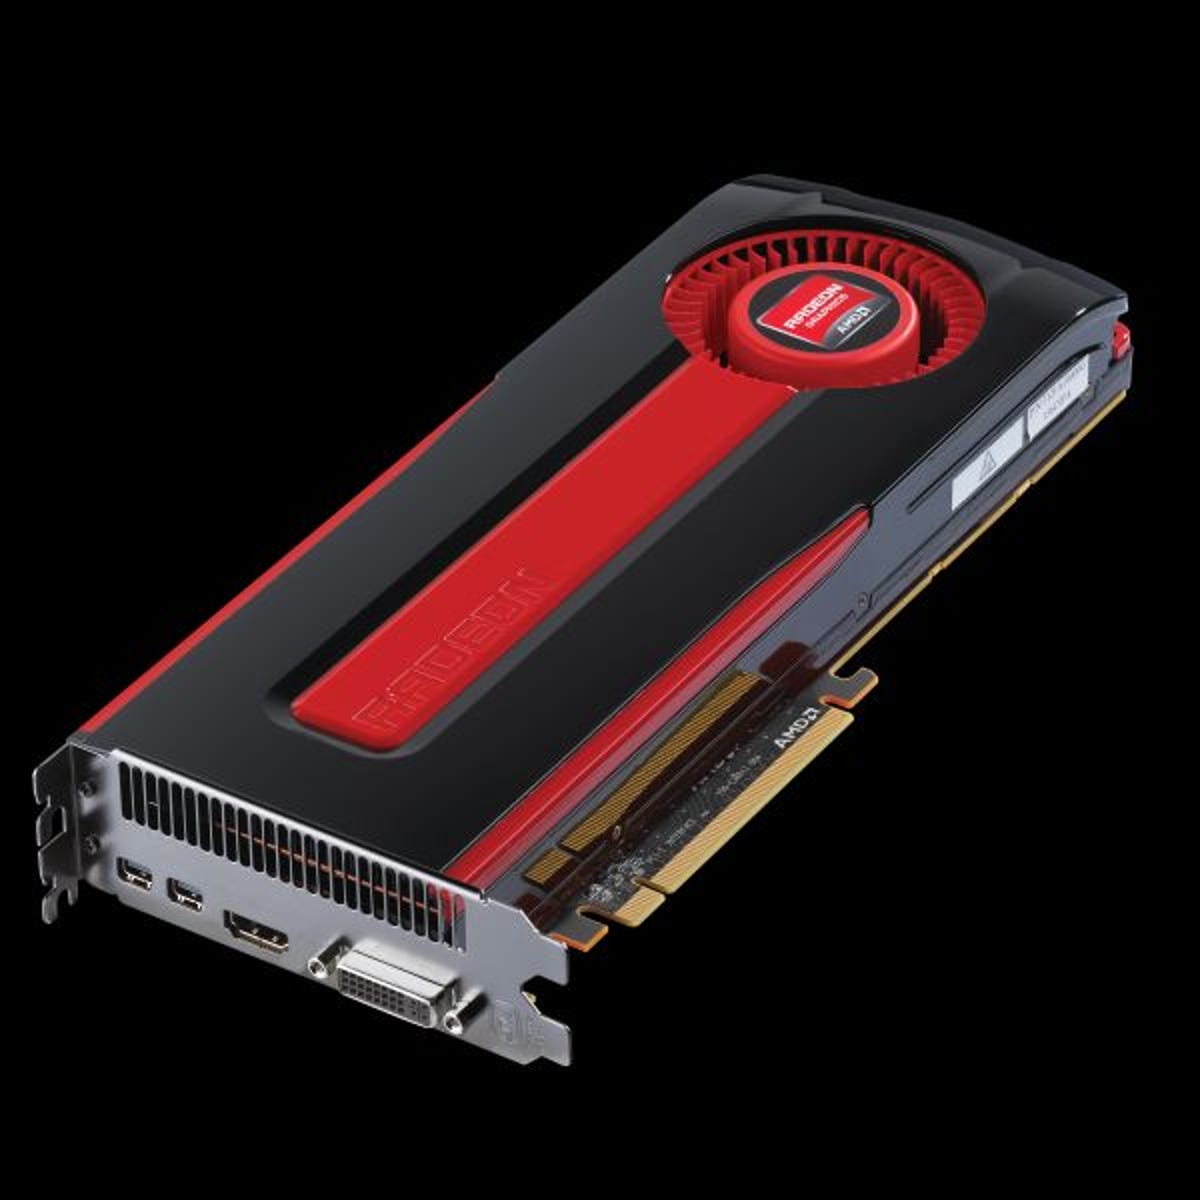 AMD back on top with new Radeon HD 7970 3D card - CNET